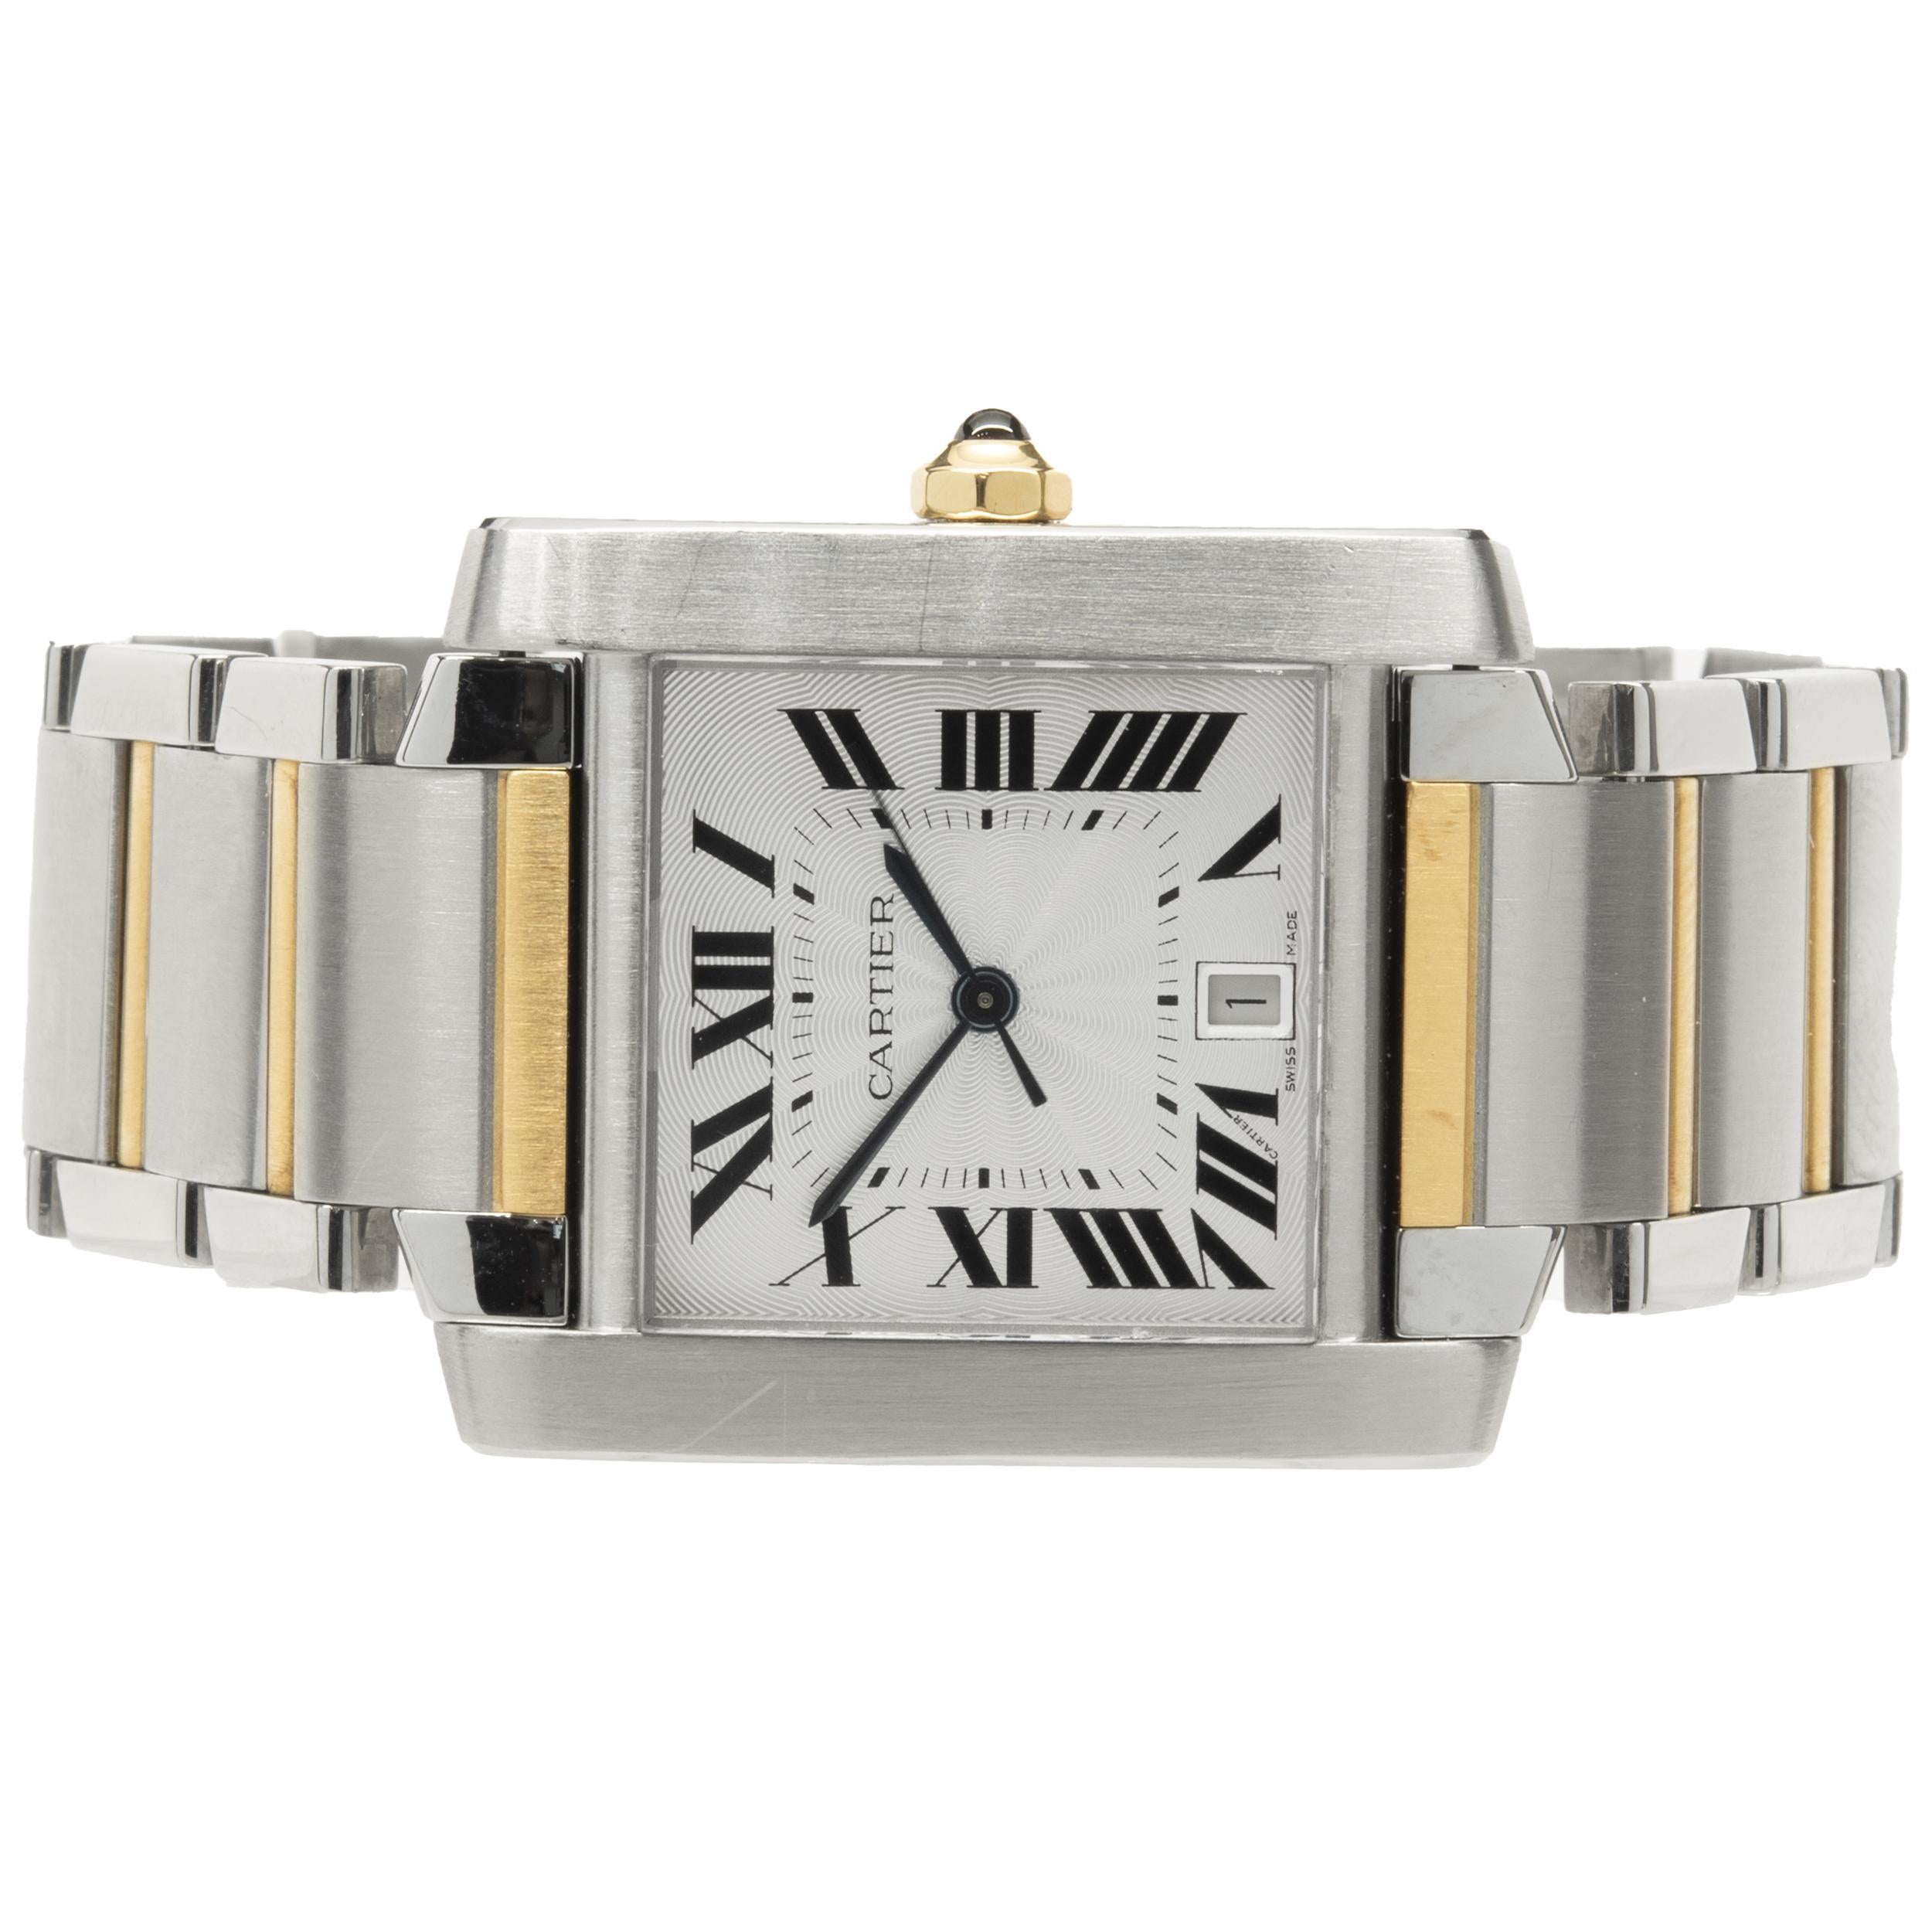 Movement: quartz
Function: hours, minutes, seconds, date
Case: 33 x 28mm stainless steel, push pull crown, sapphire crystal, smooth bezel
Dial: white roman dial, steel sword sweeping hands
Band: Cartier stainless steel and 18K yellow gold bracelet,